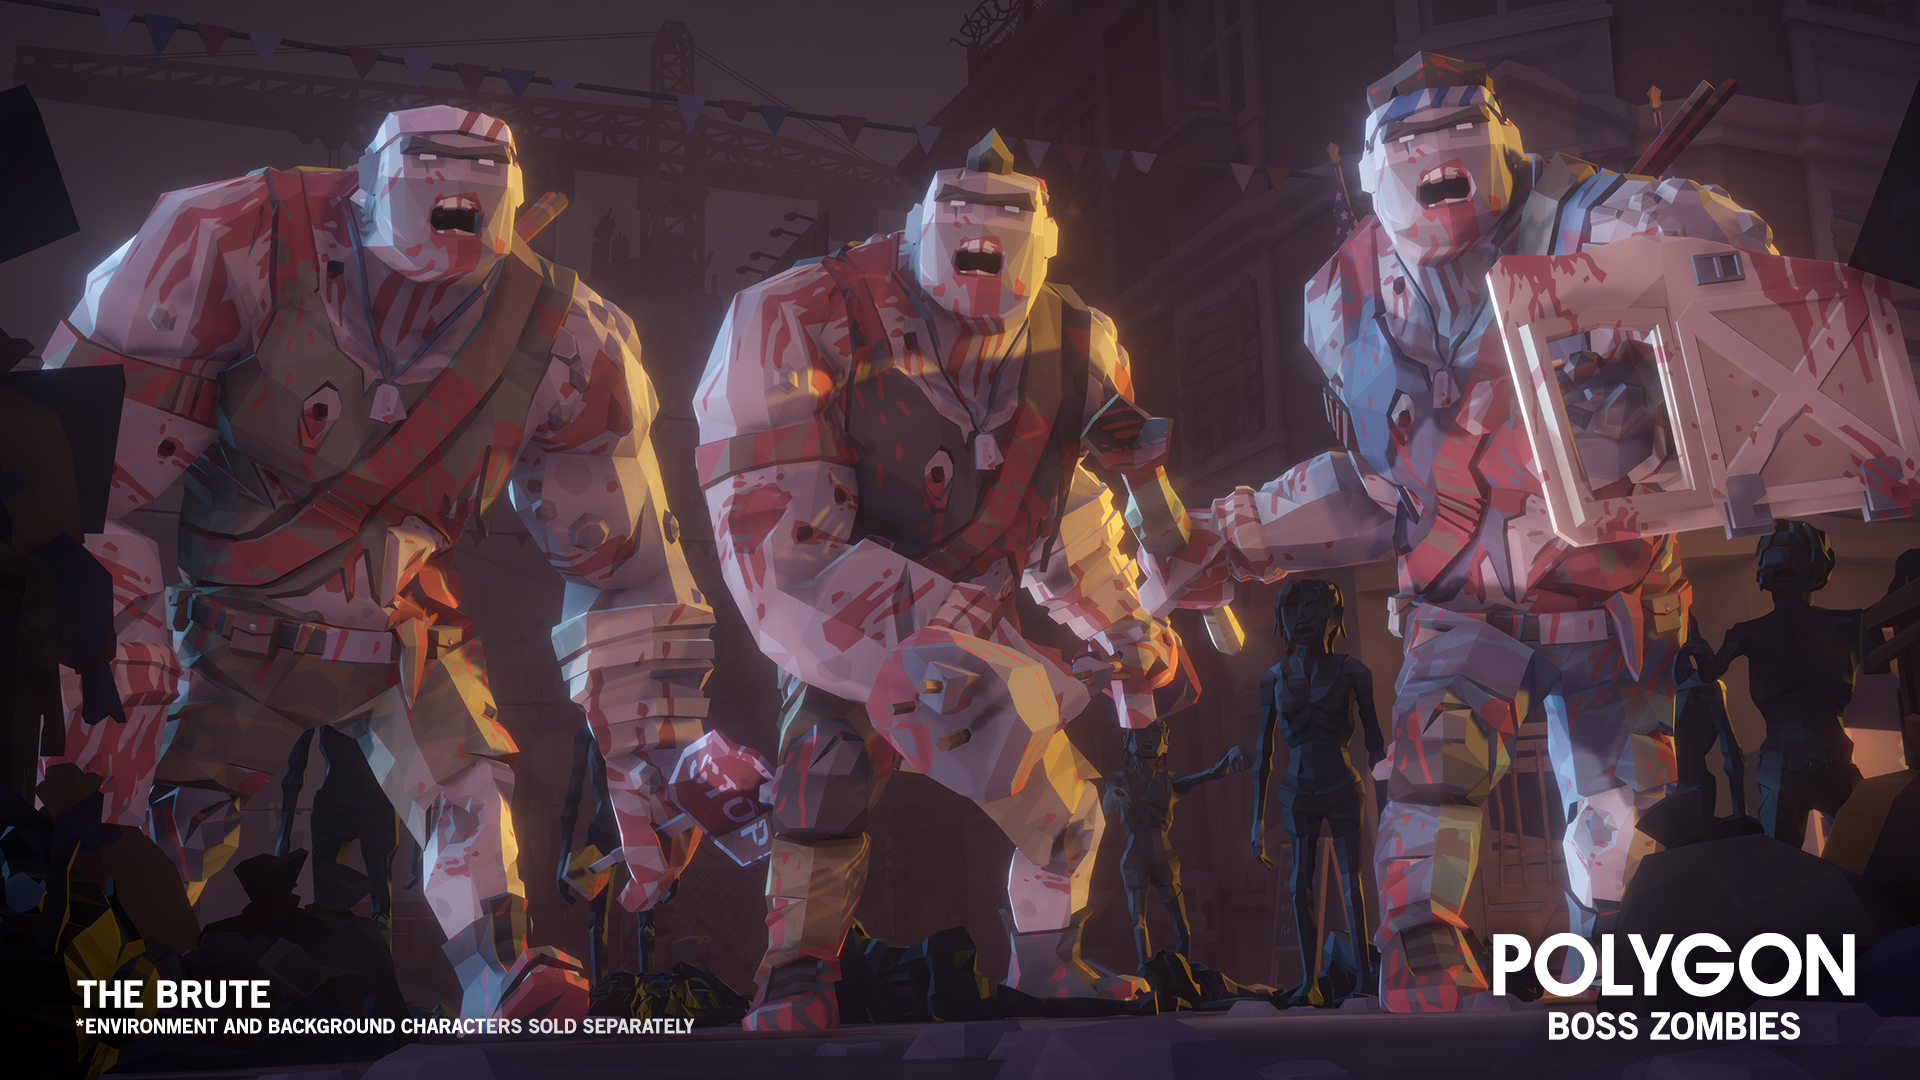 The Brute characters from the Polygon Boss Zombies 3D asset pack for Unreal Engine and Unity